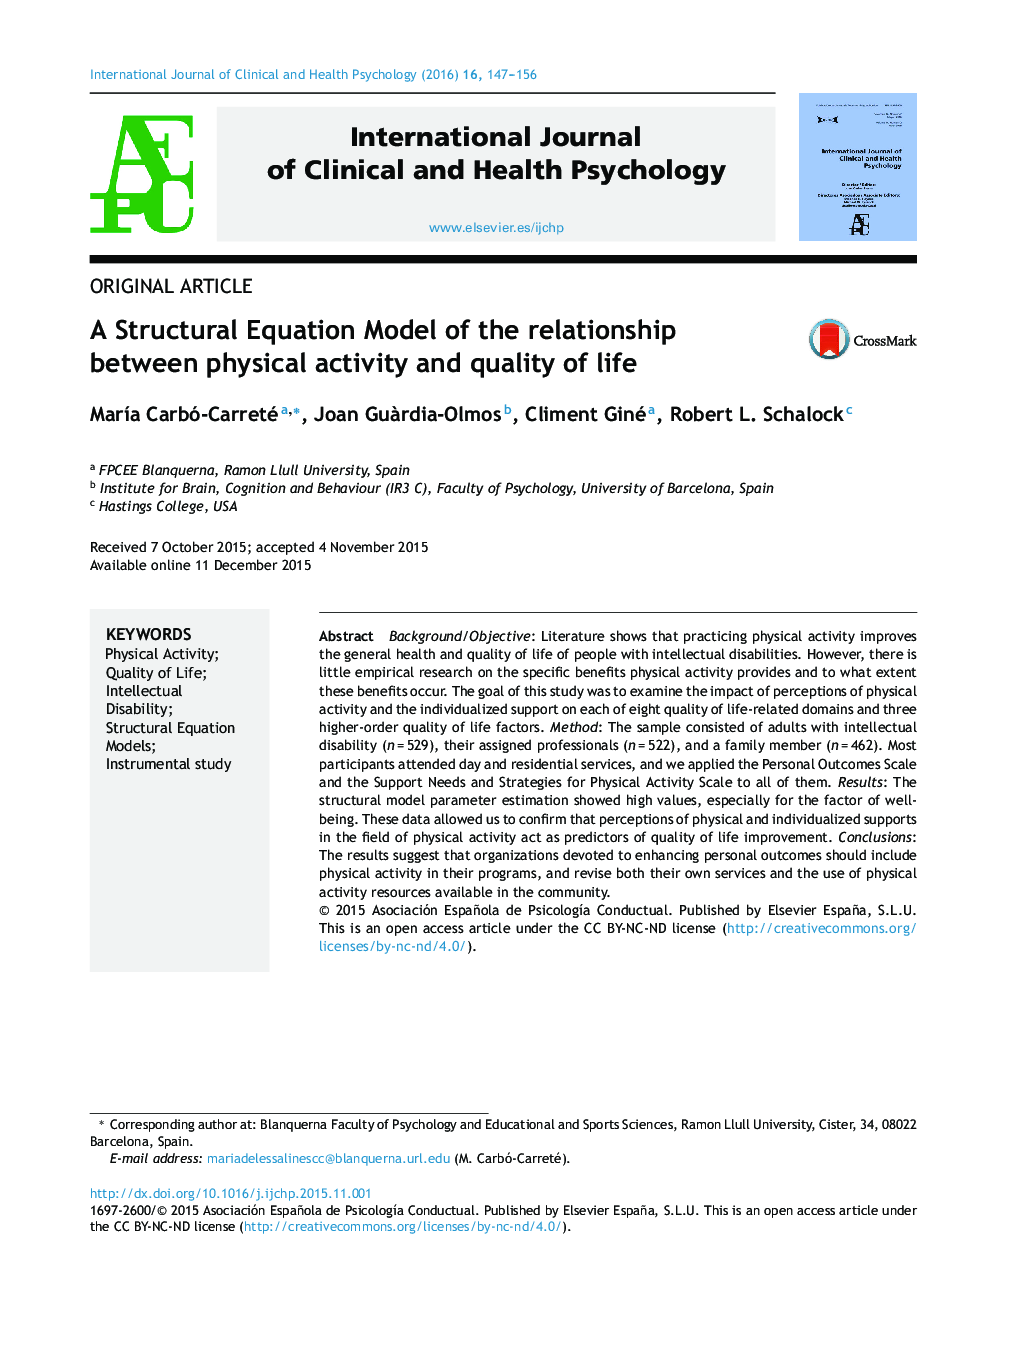 A Structural Equation Model of the relationship between physical activity and quality of life